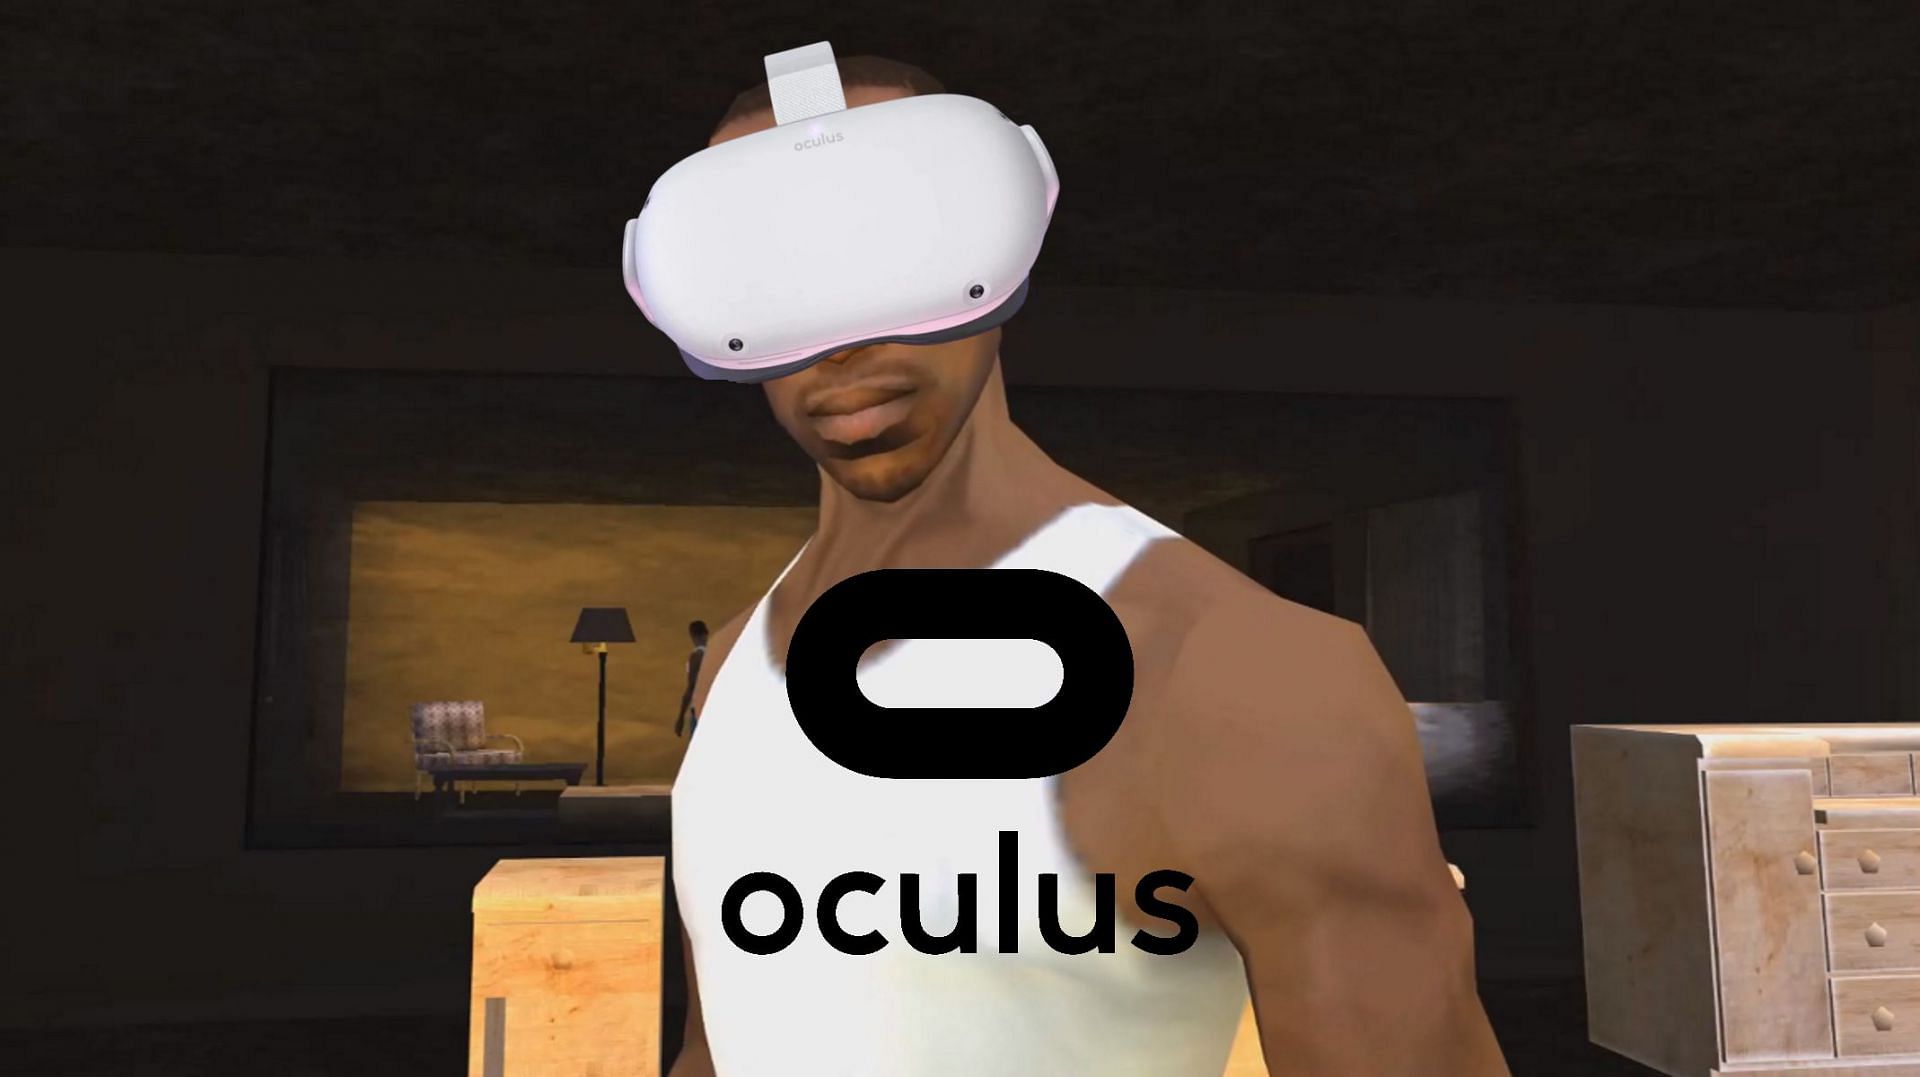 GTA San Andreas is in development for the Oculus Quest 2 (Image via Rockstar Games)